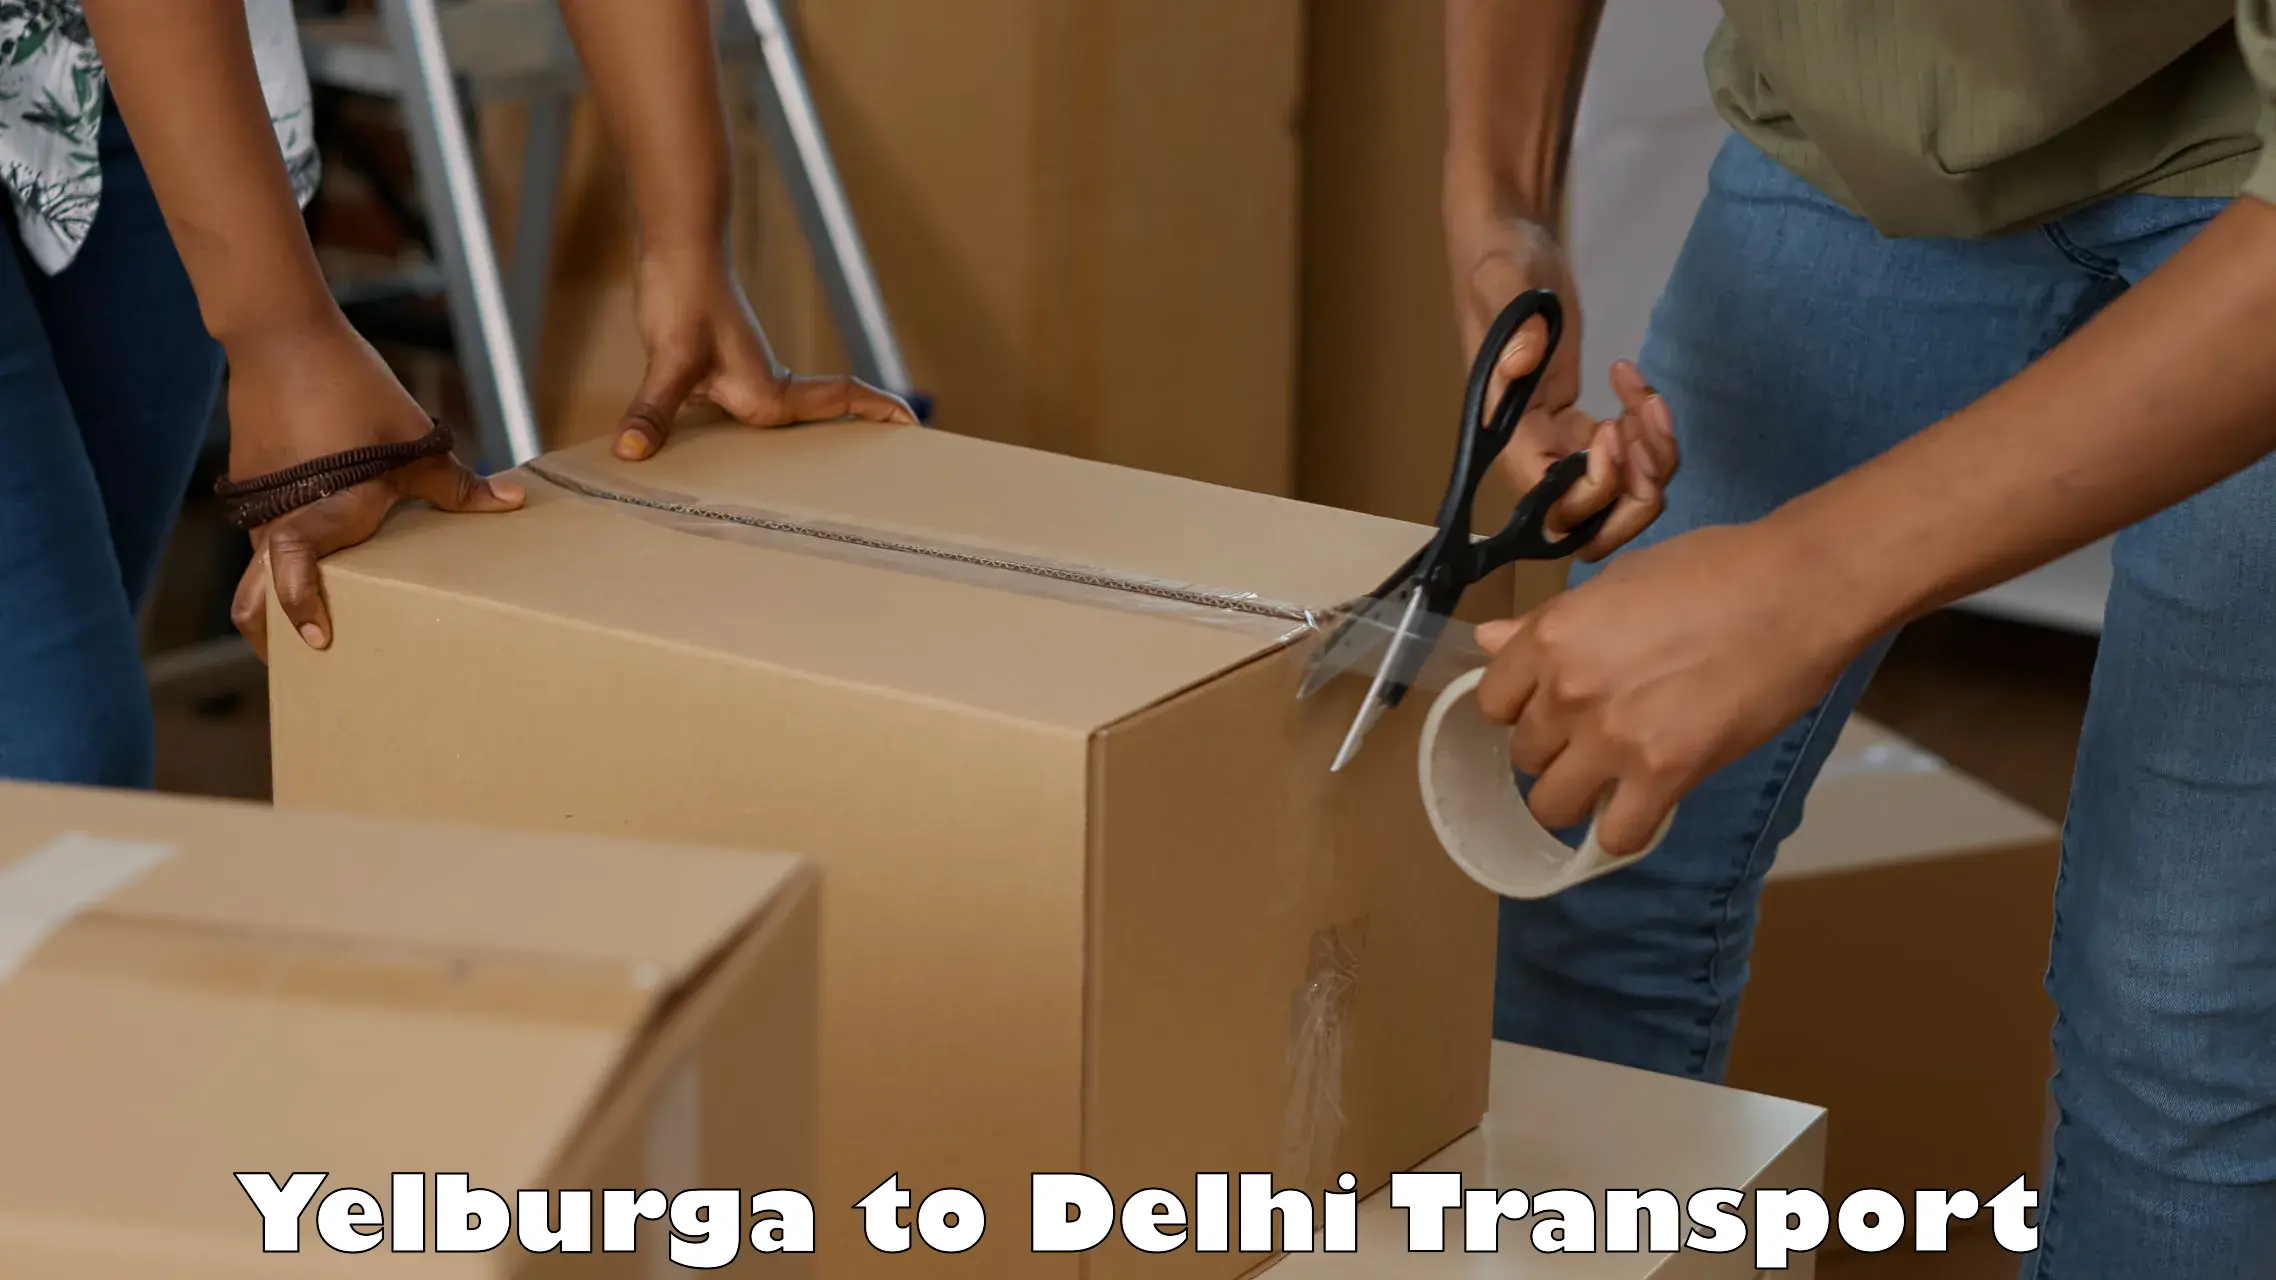 Truck transport companies in India Yelburga to NCR